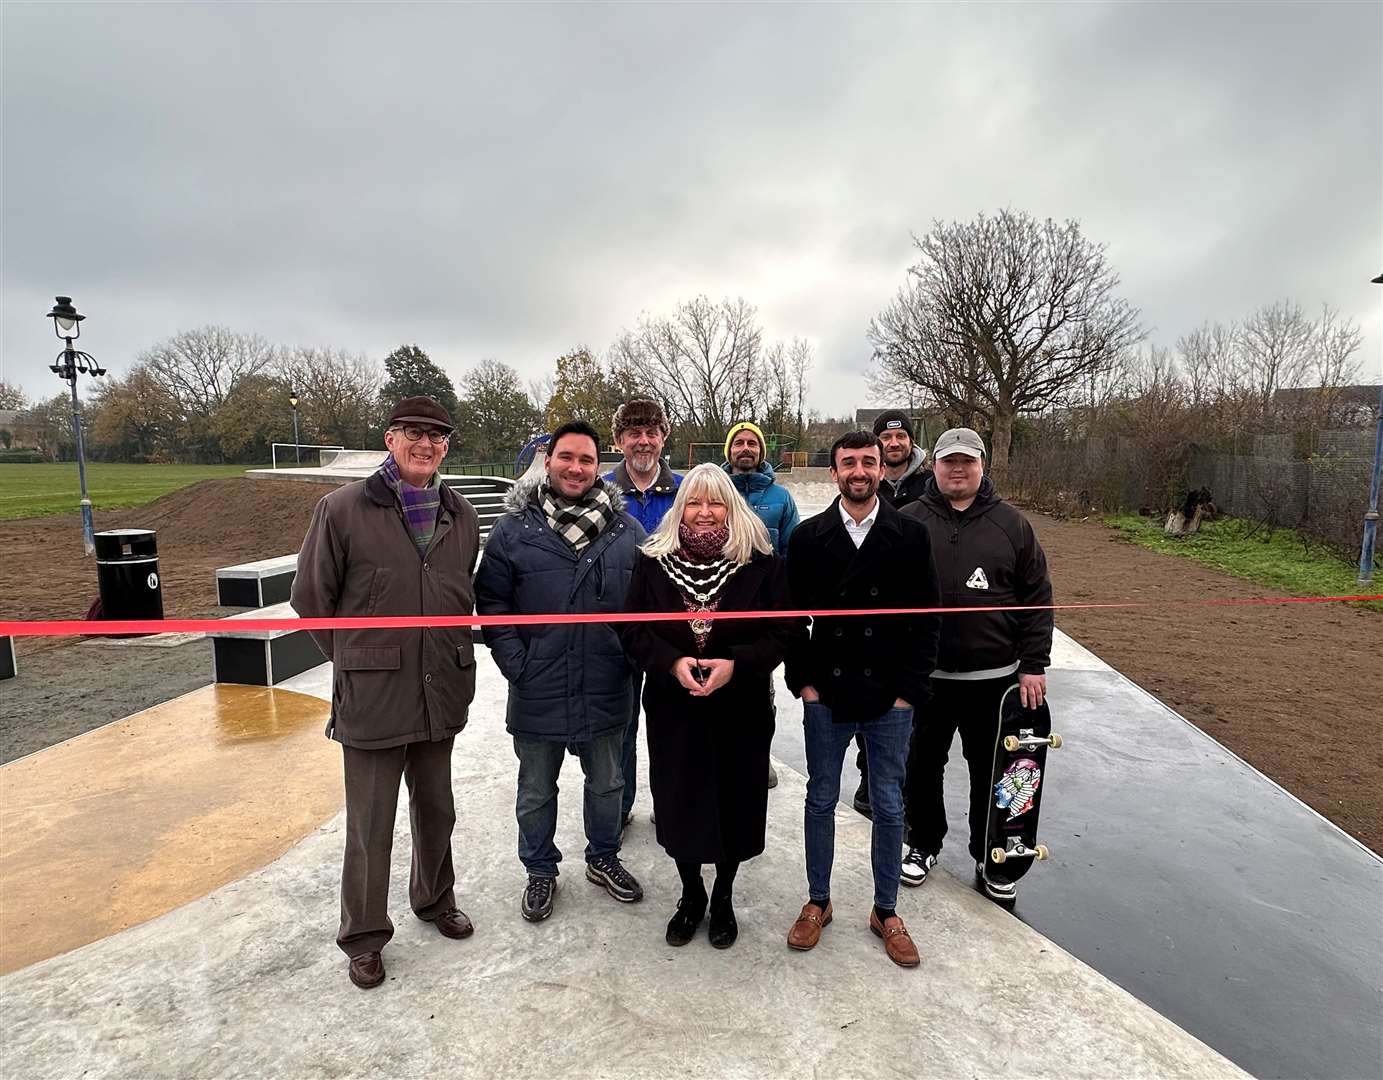 The new Swanley skate park was officially opened by Cllr Lesley Dyball, pictured centre. Photo: Swanley Town Council